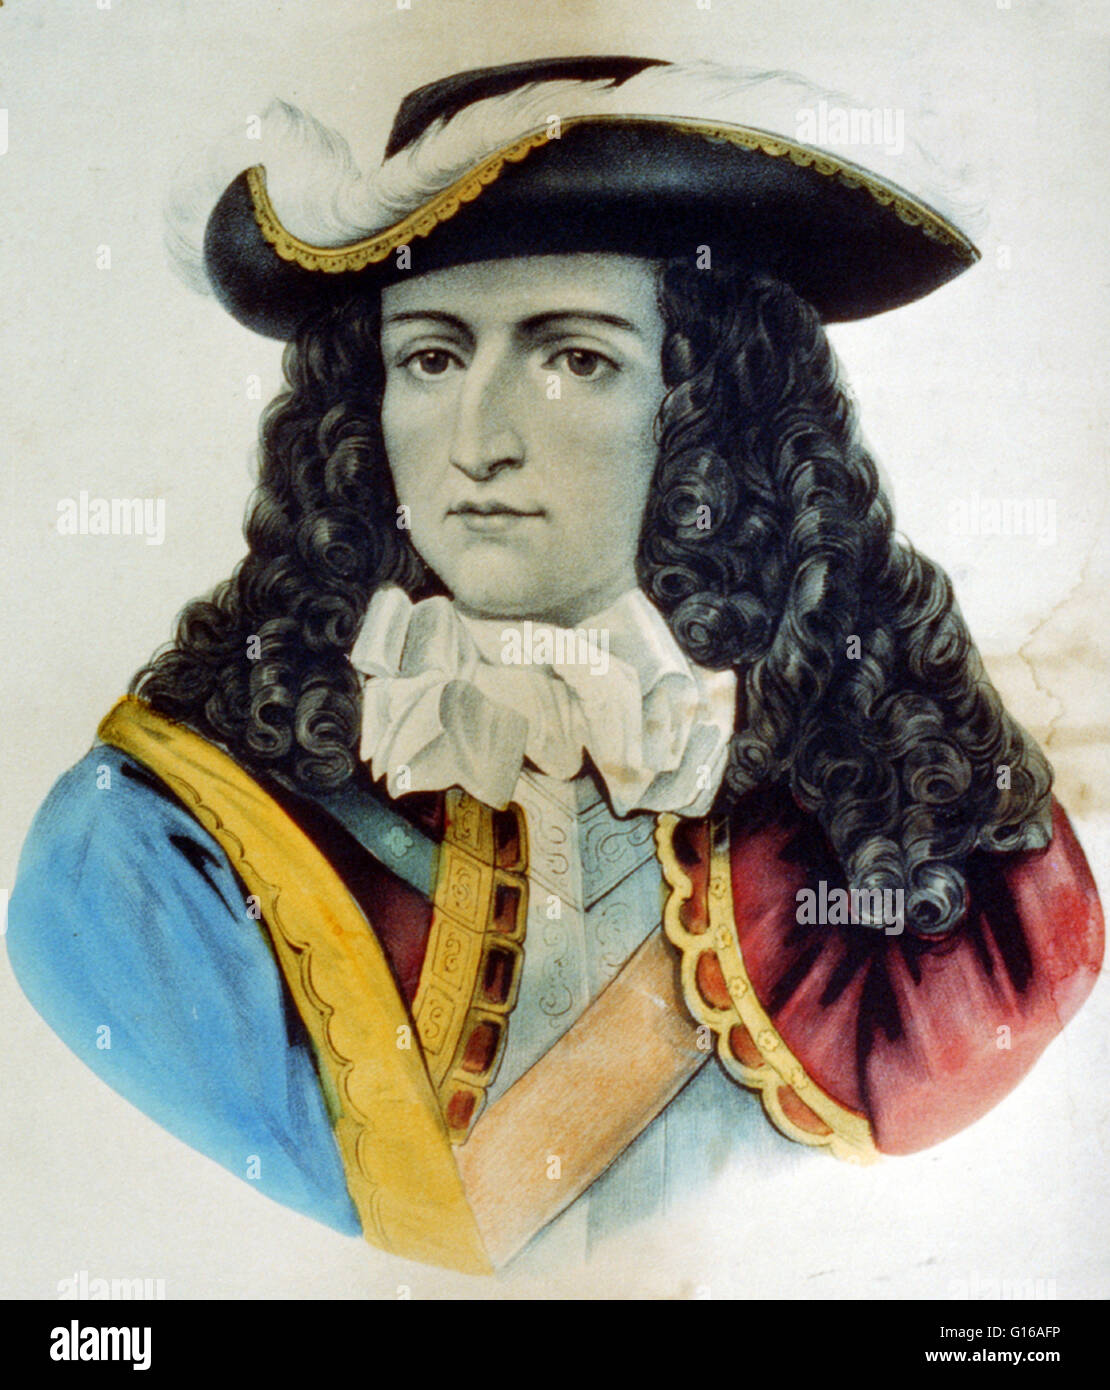 Hand-colored Currier & Ives lithograph of William III, Prince of Orange. William III & II (November 4, 1650 - March 8, 1702) was a sovereign Prince of Orange of the House of Orange-Nassau by birth. From 1672 he governed as Stadtholder William III of Orang Stock Photo